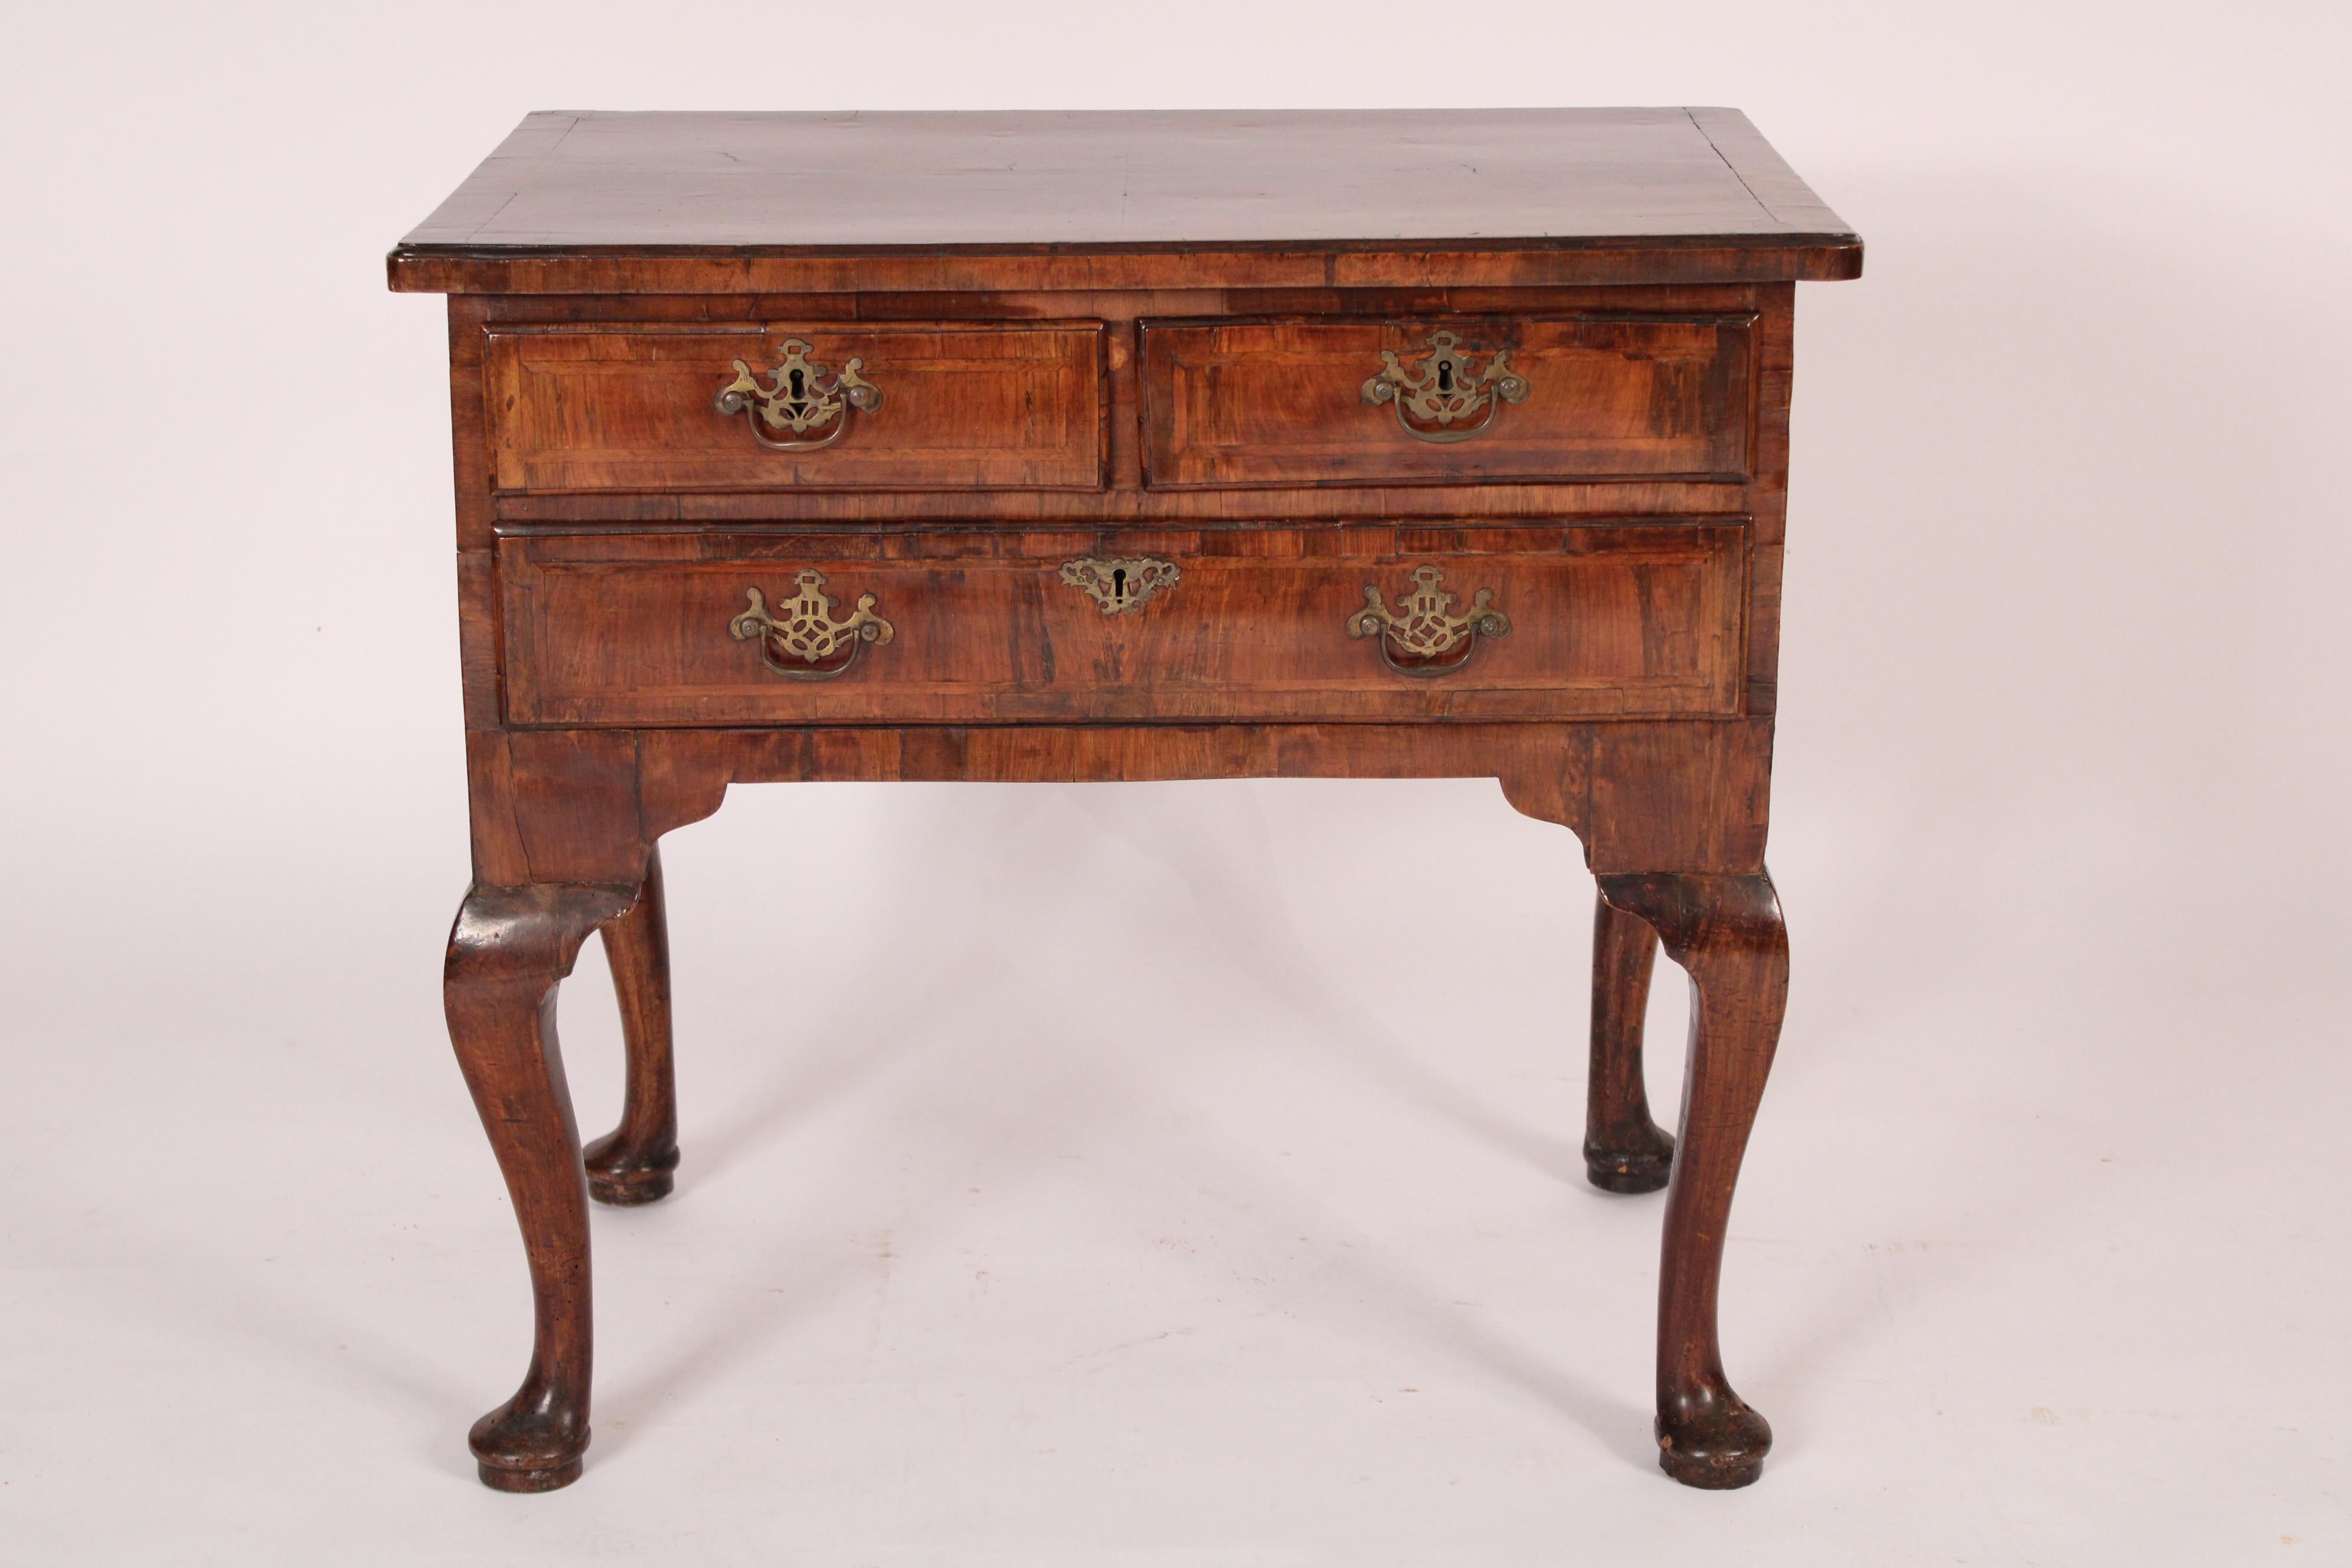 Queen Anne walnut lowboy, 18th century. With a rectangular top with rounded front corners and herringbone inlay, two top drawers over a long bottom drawer, all drawers with herringbone inlay, resting on 4 cabriole legs ending in pad feet. Nice old